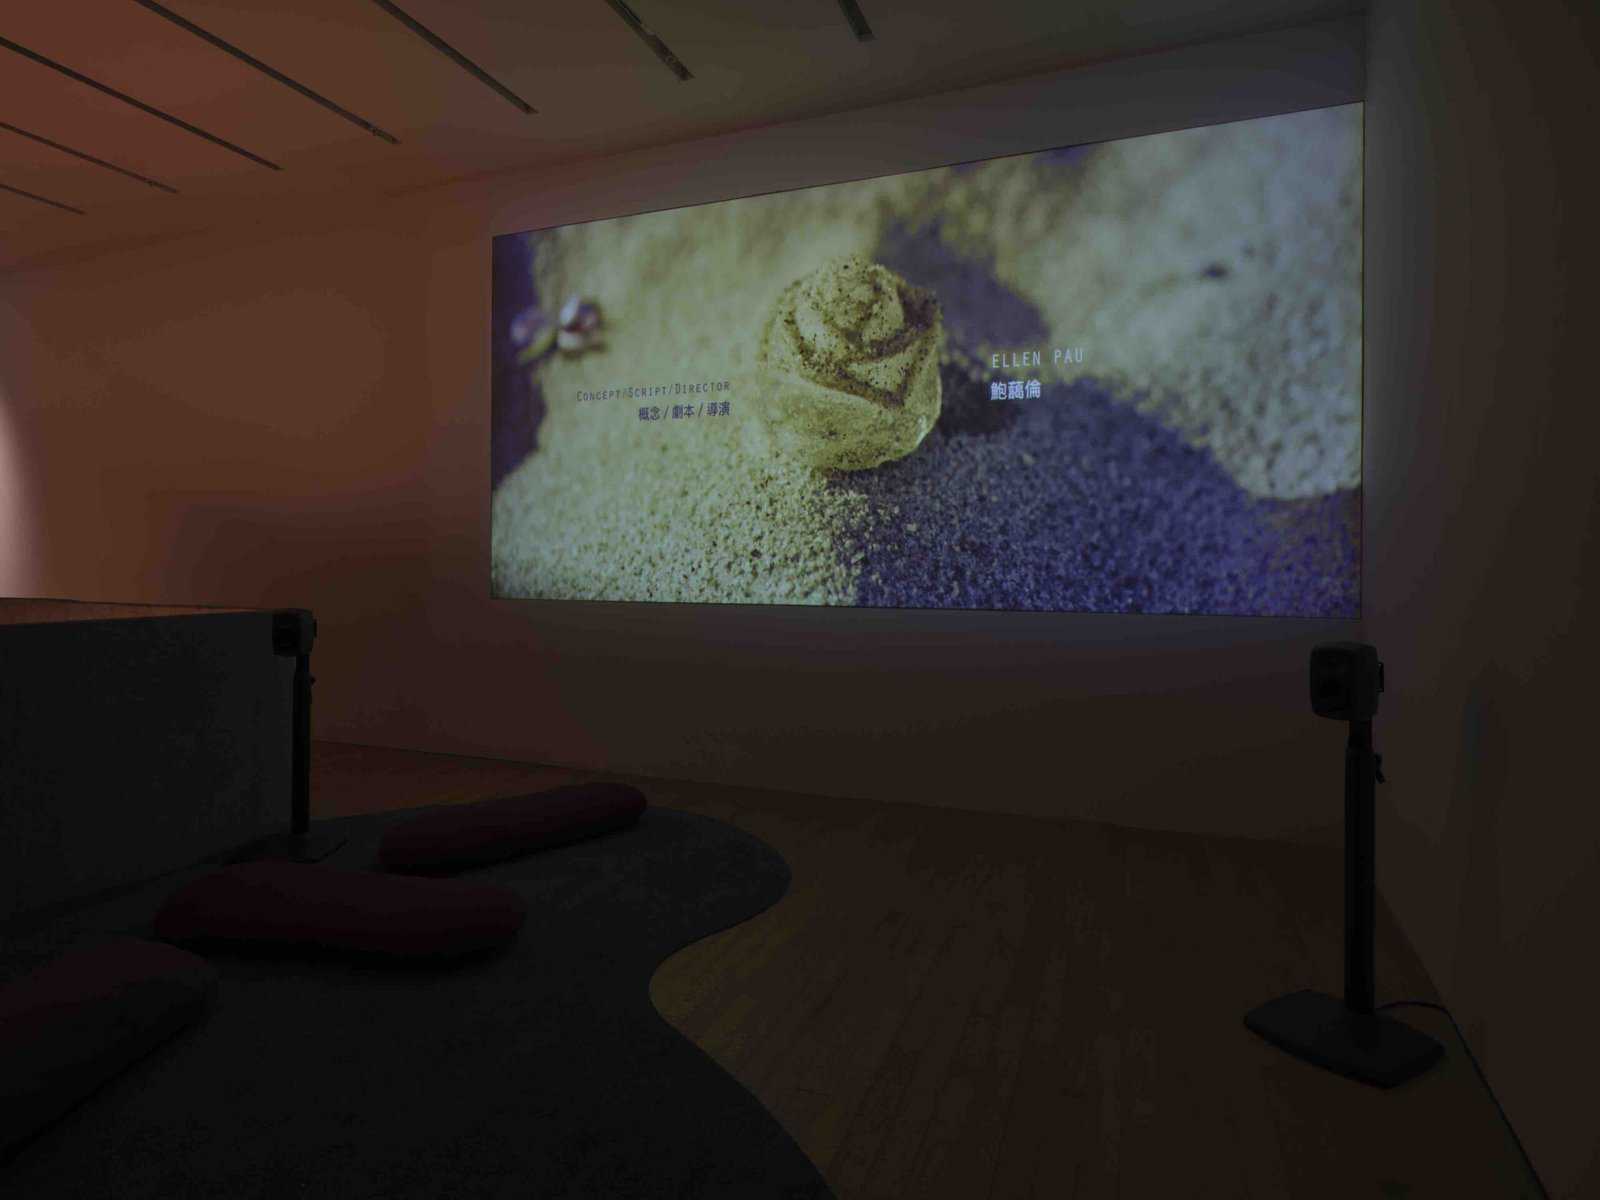 Ellen Pau, 52Hz, 2022. Installation view of Myth Makers—Spectrosynthesis III. Photography: South Ho, image courtesy of Sunpride Foundation.